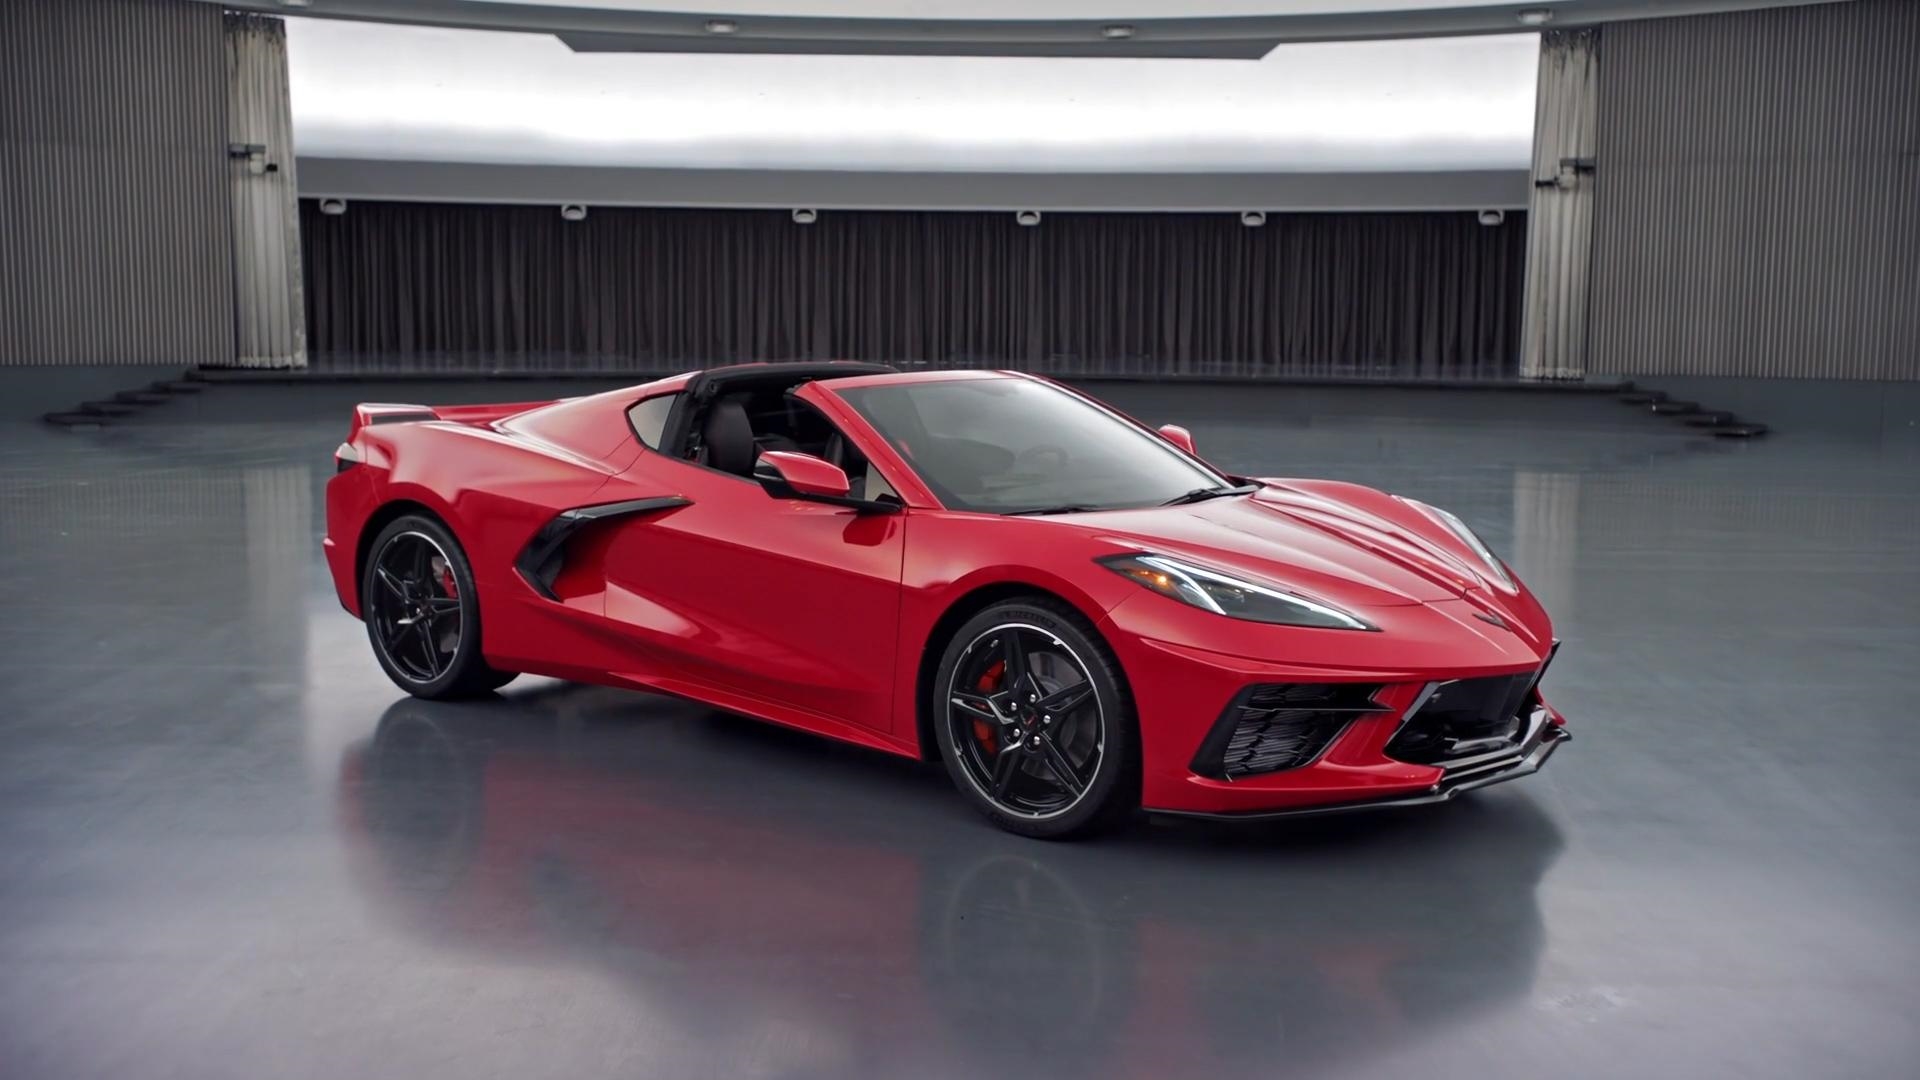 Chevrolet unveils convertible and race car versions of its 2020 Corvette | DeviceDaily.com